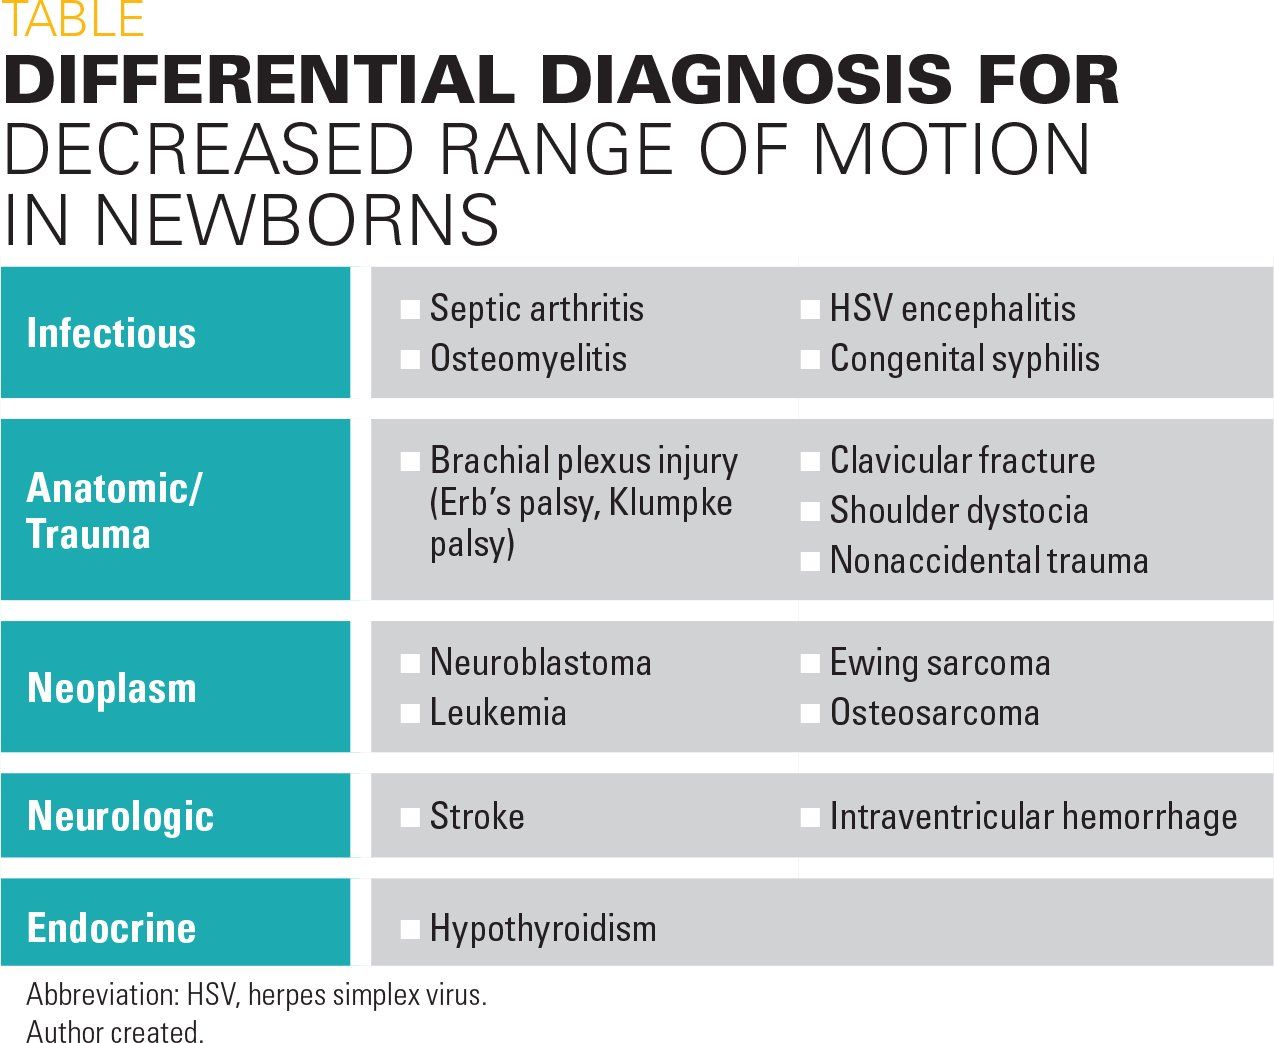 Differential diagnosis for decreased range of motion in newborns